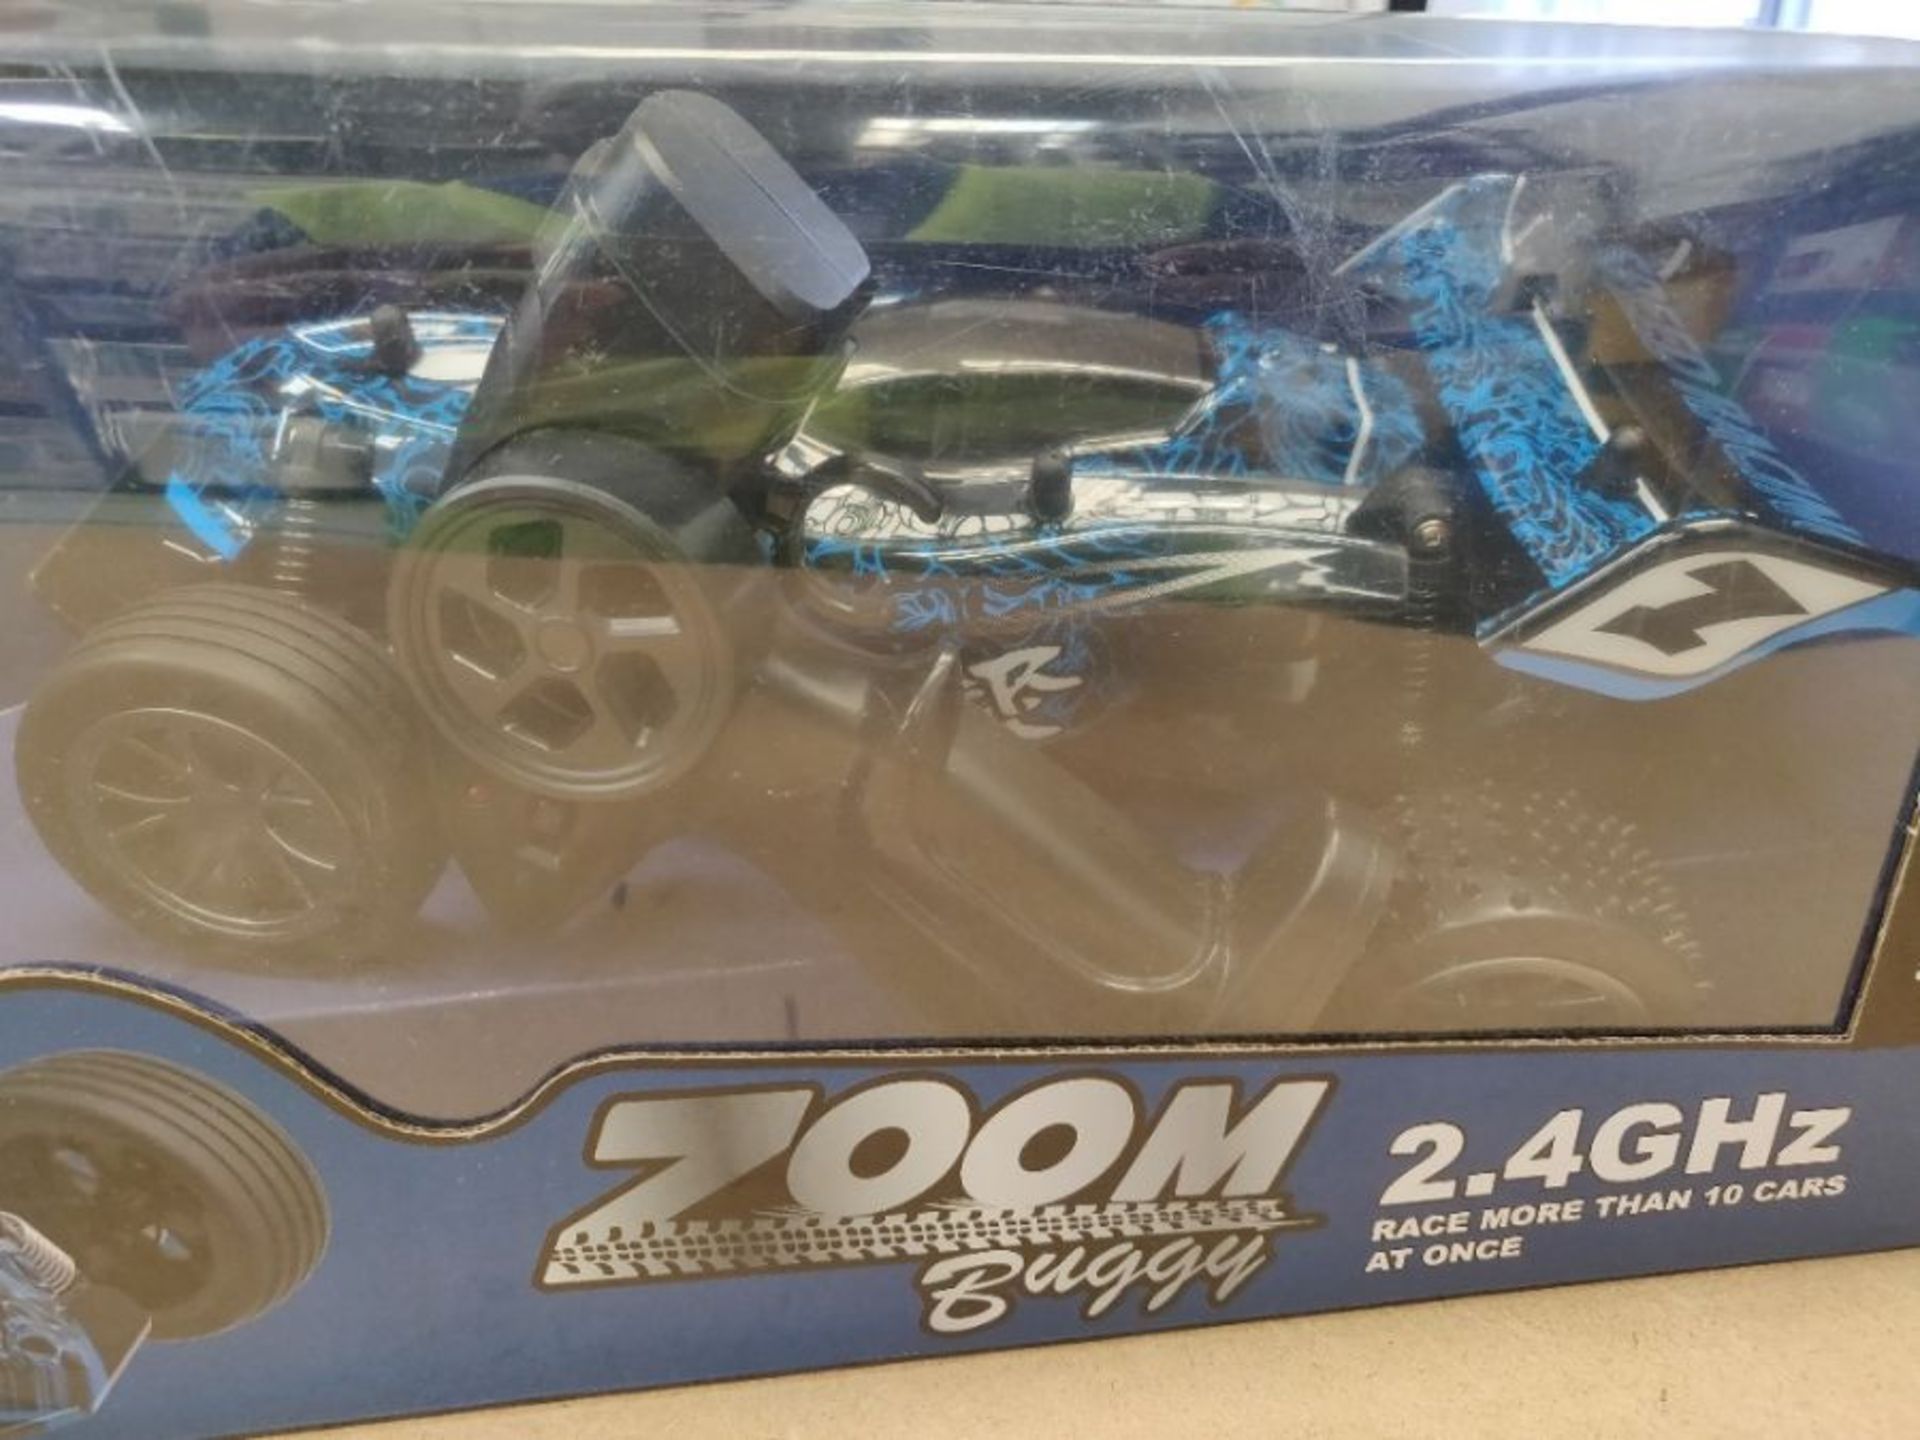 CMJ RC Cars 116HSRB Blue Remote Zoom Buggy 1:16 Electric Radio Controlled Car High Spe - Image 2 of 2